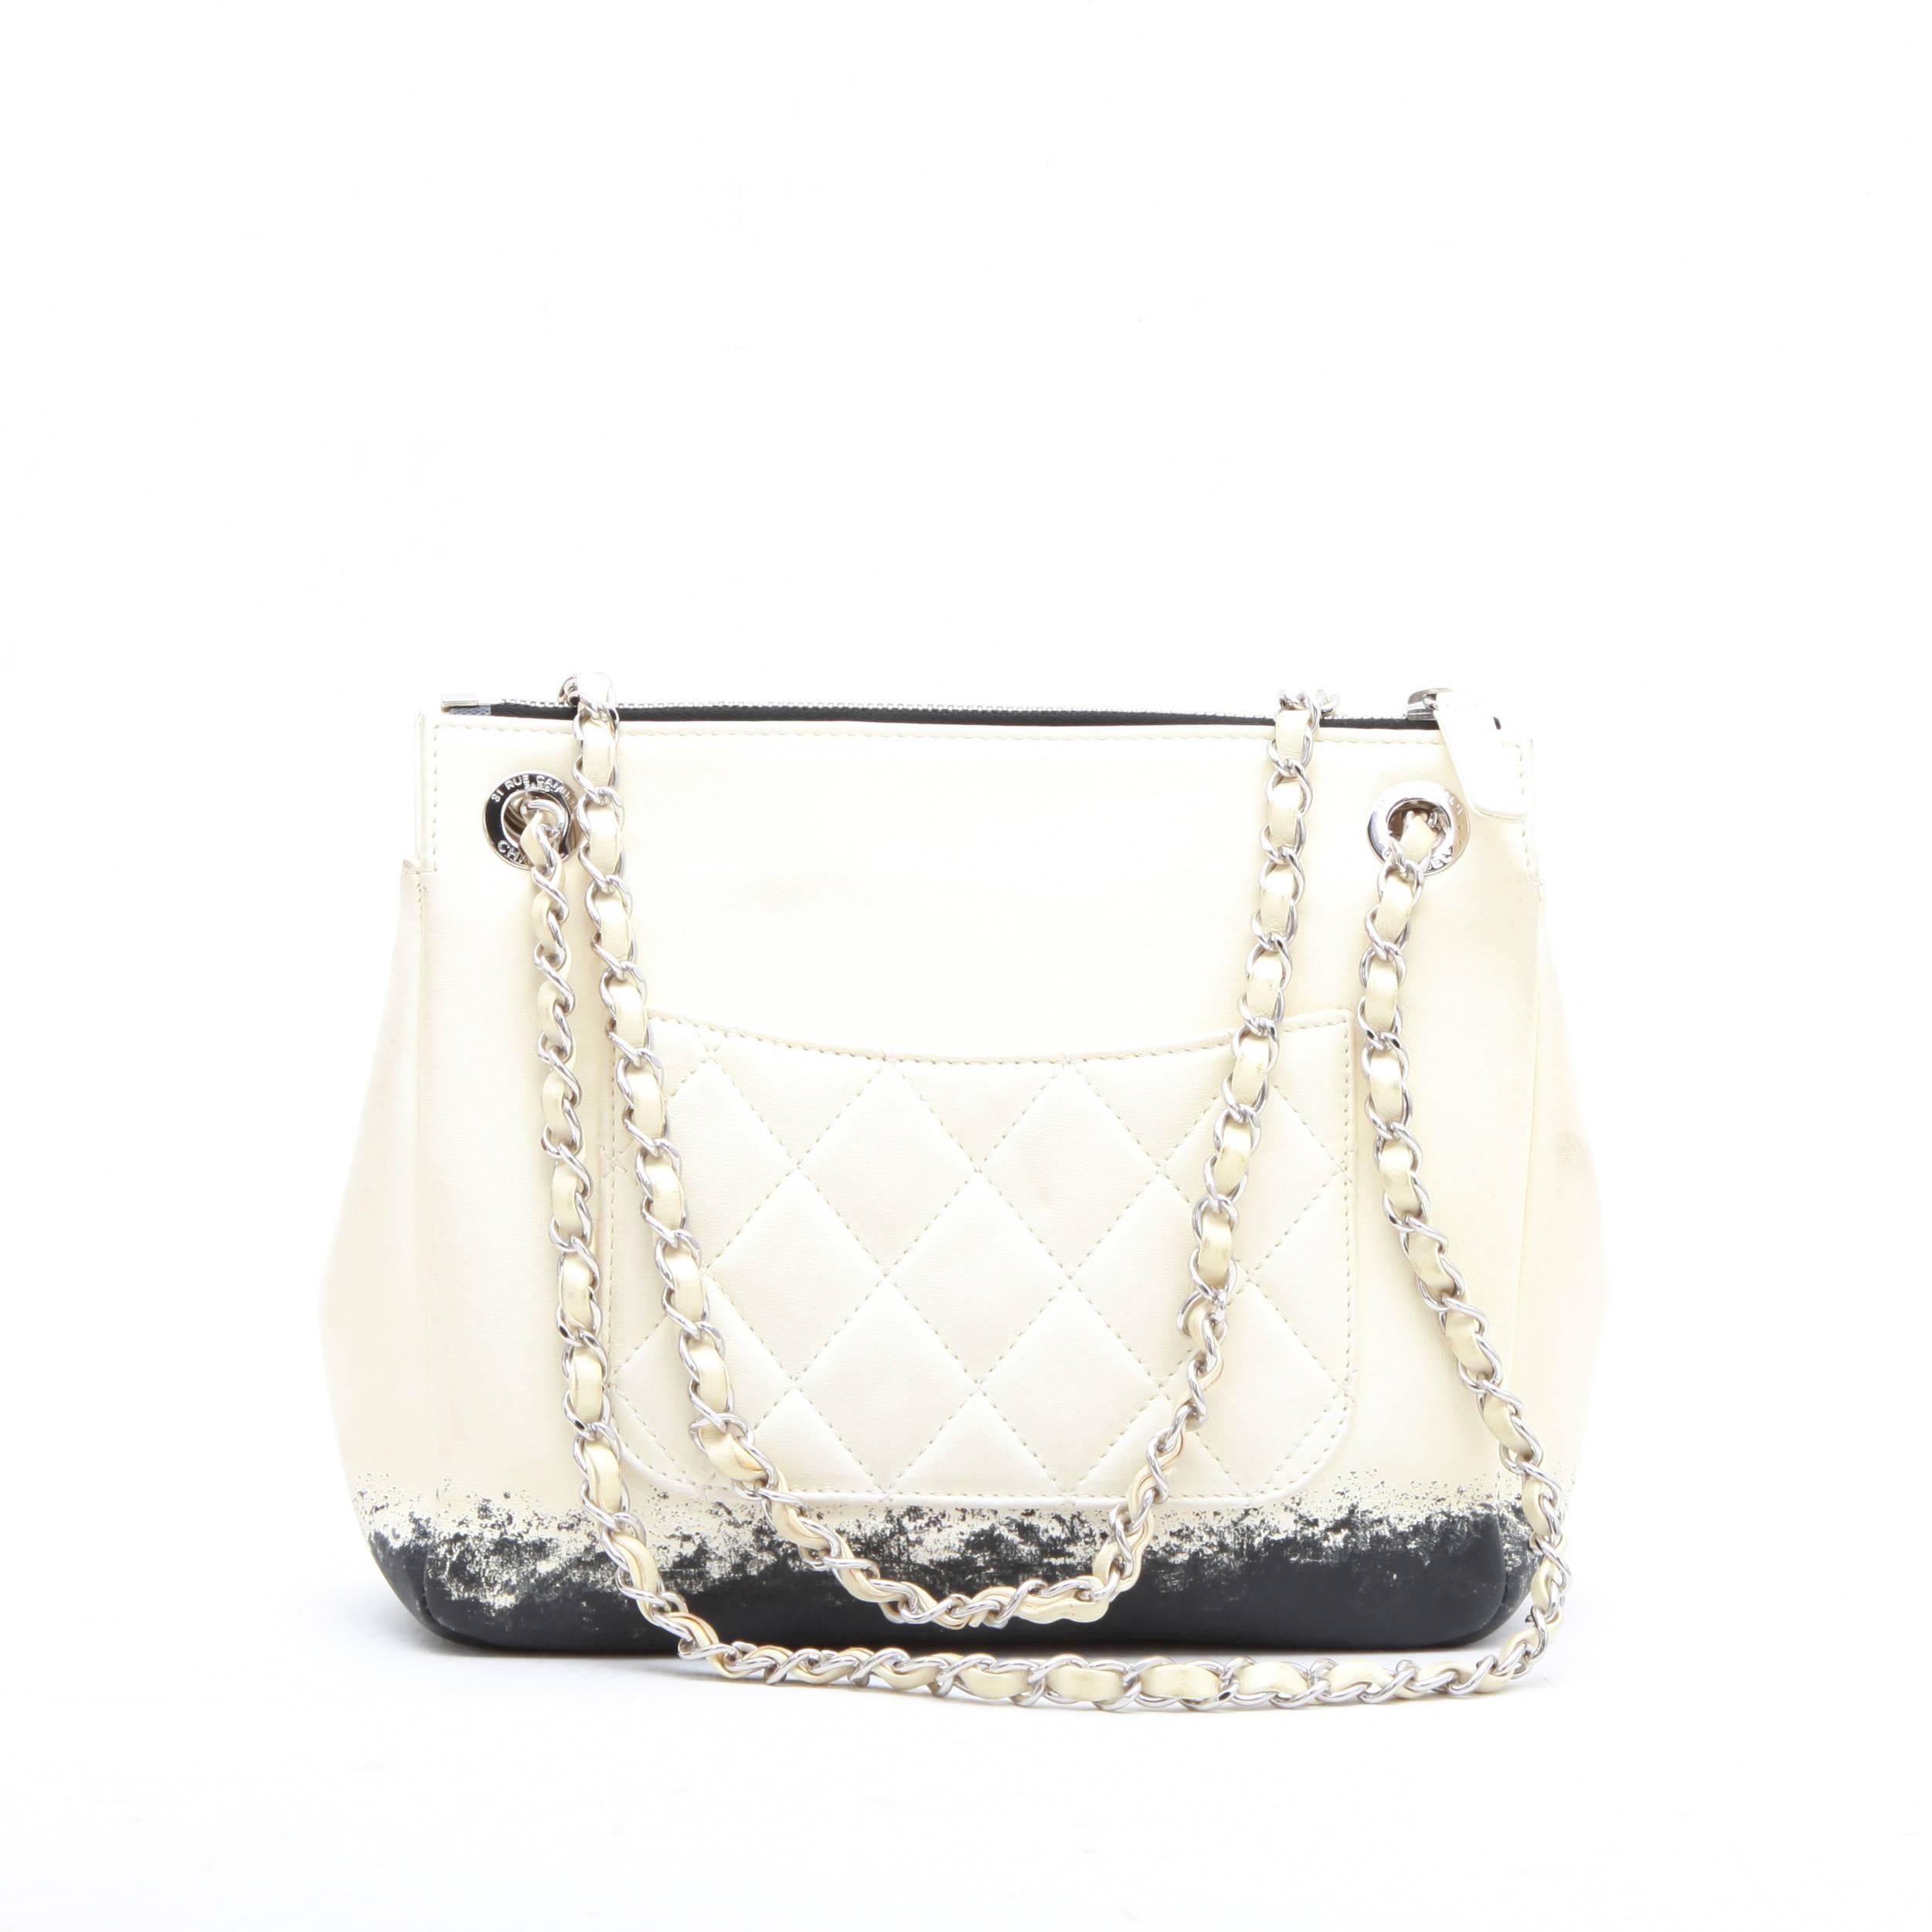 Chanel bag in beige and black two-tone lamb leather. Silver palladium hardware. Zip closure. The interior is in black satin. 
Included : Hologram 14088... year 2011. No authenticity card. 
Stamp S from the private sales at the bottom of the bag.